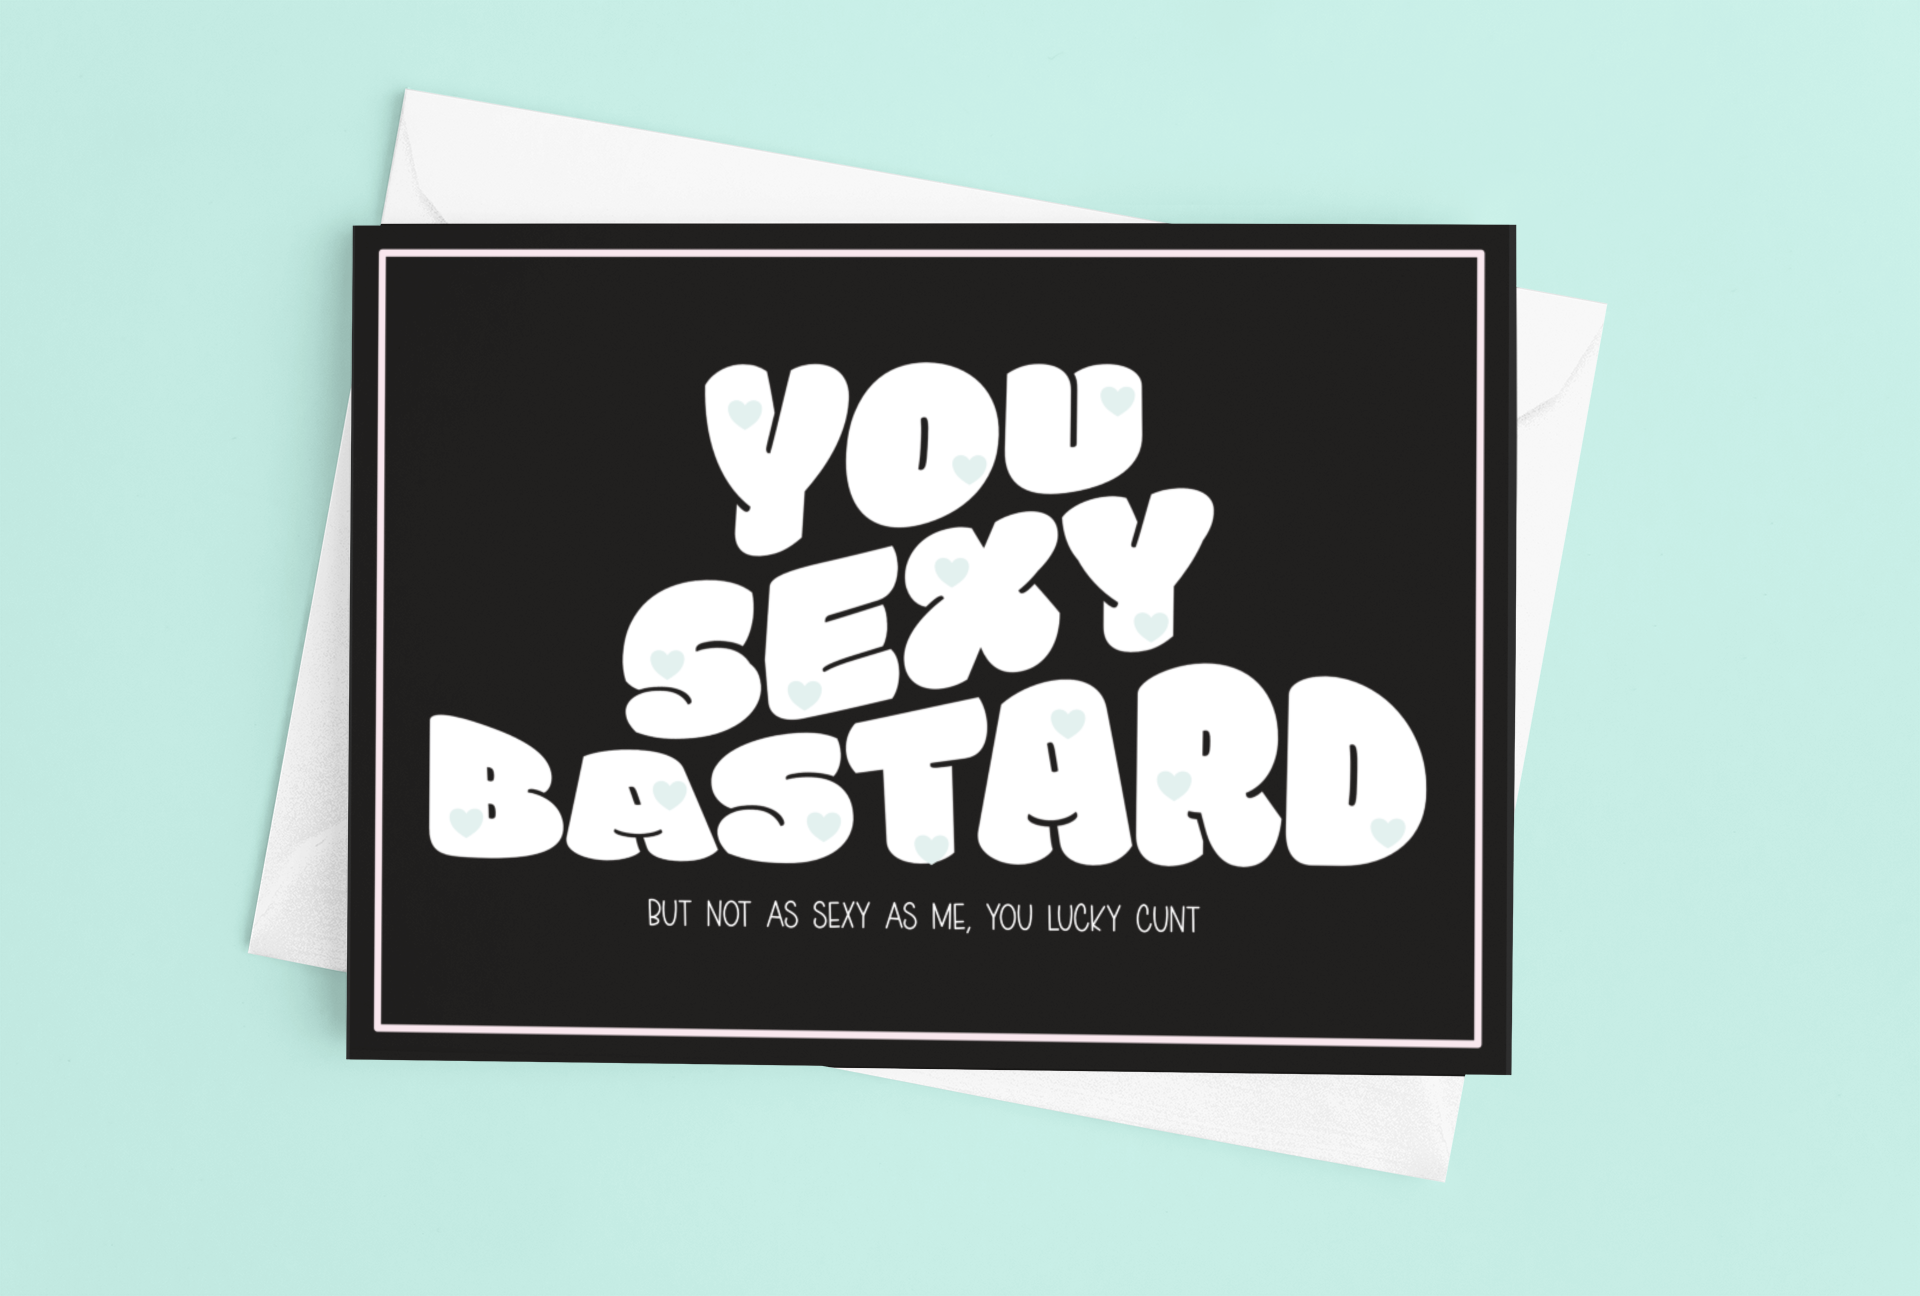 Black horizontal greetings card with a fun quote saying 'you sexy bastard' in a bold font. Underneath is a smaller font which reads 'but not as sexy as me, you lucky c*nt.